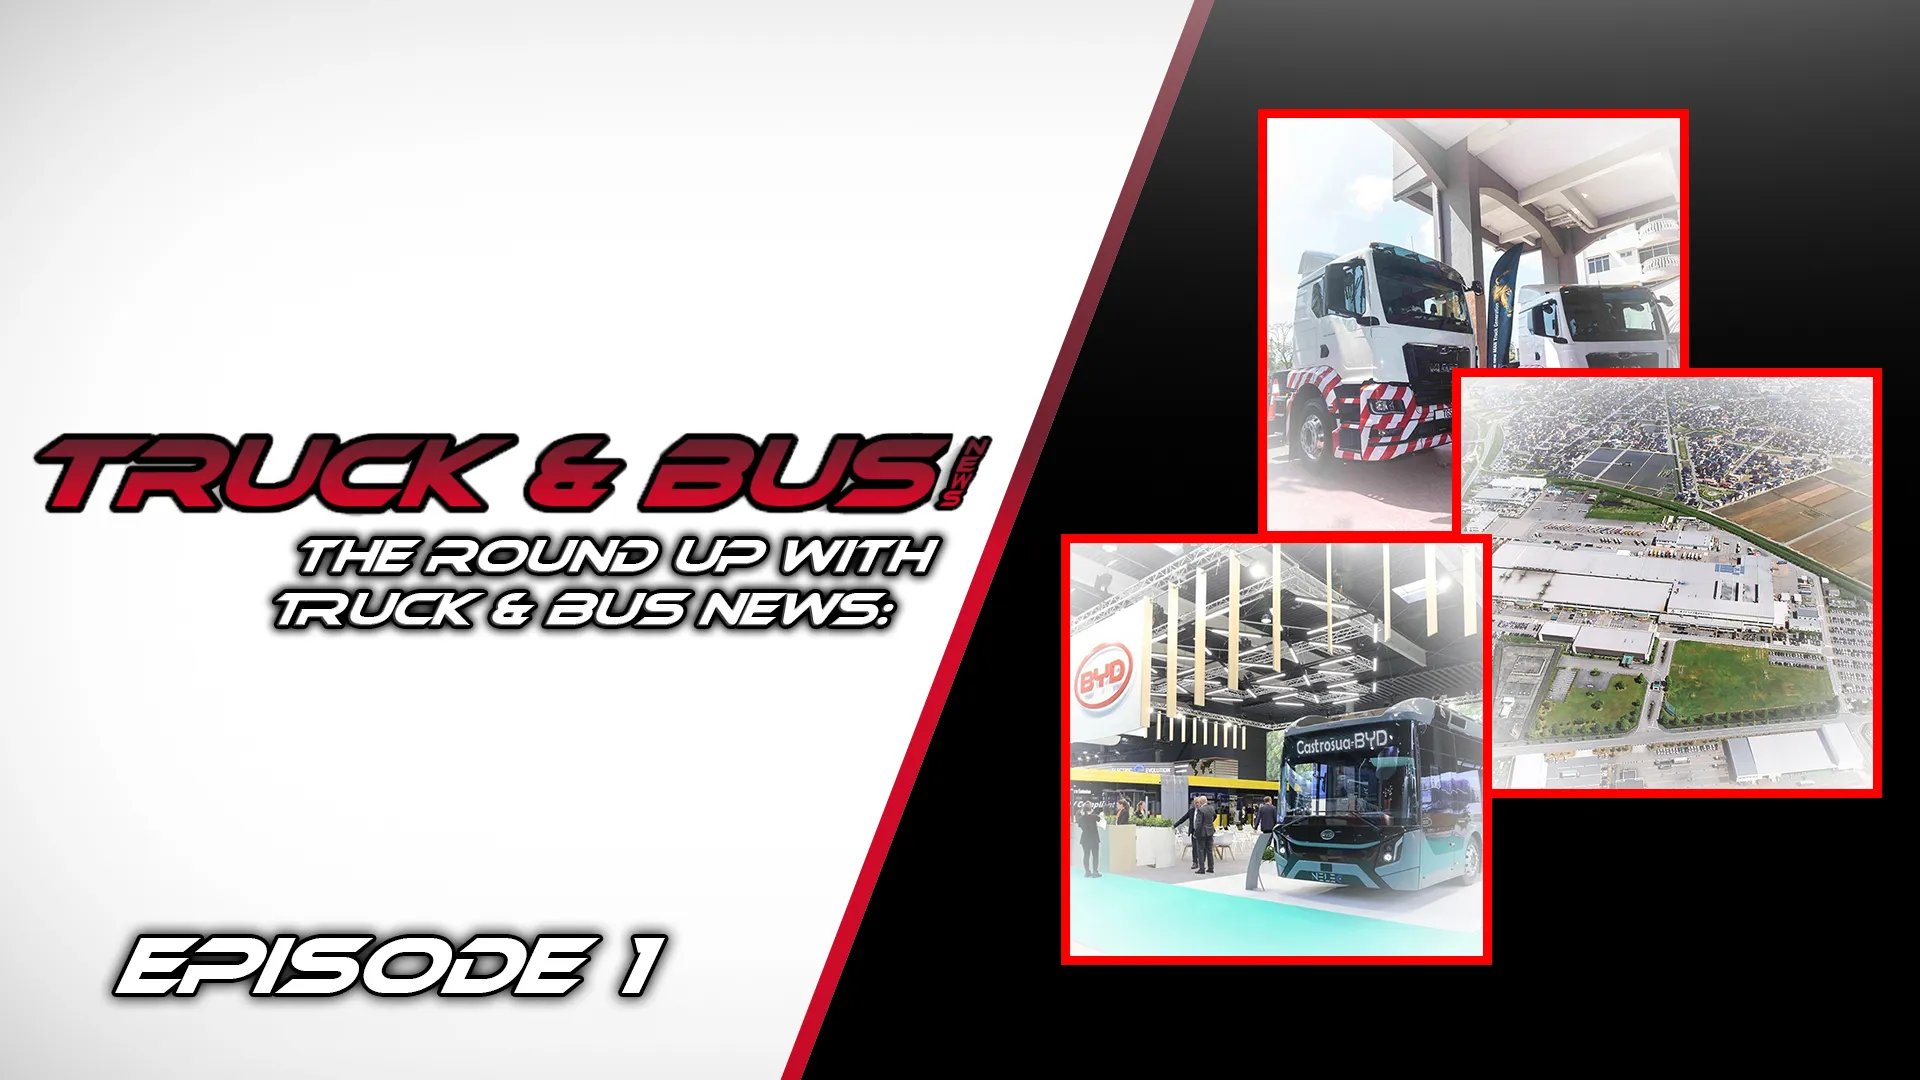 Truck Bus News Launches First Episode